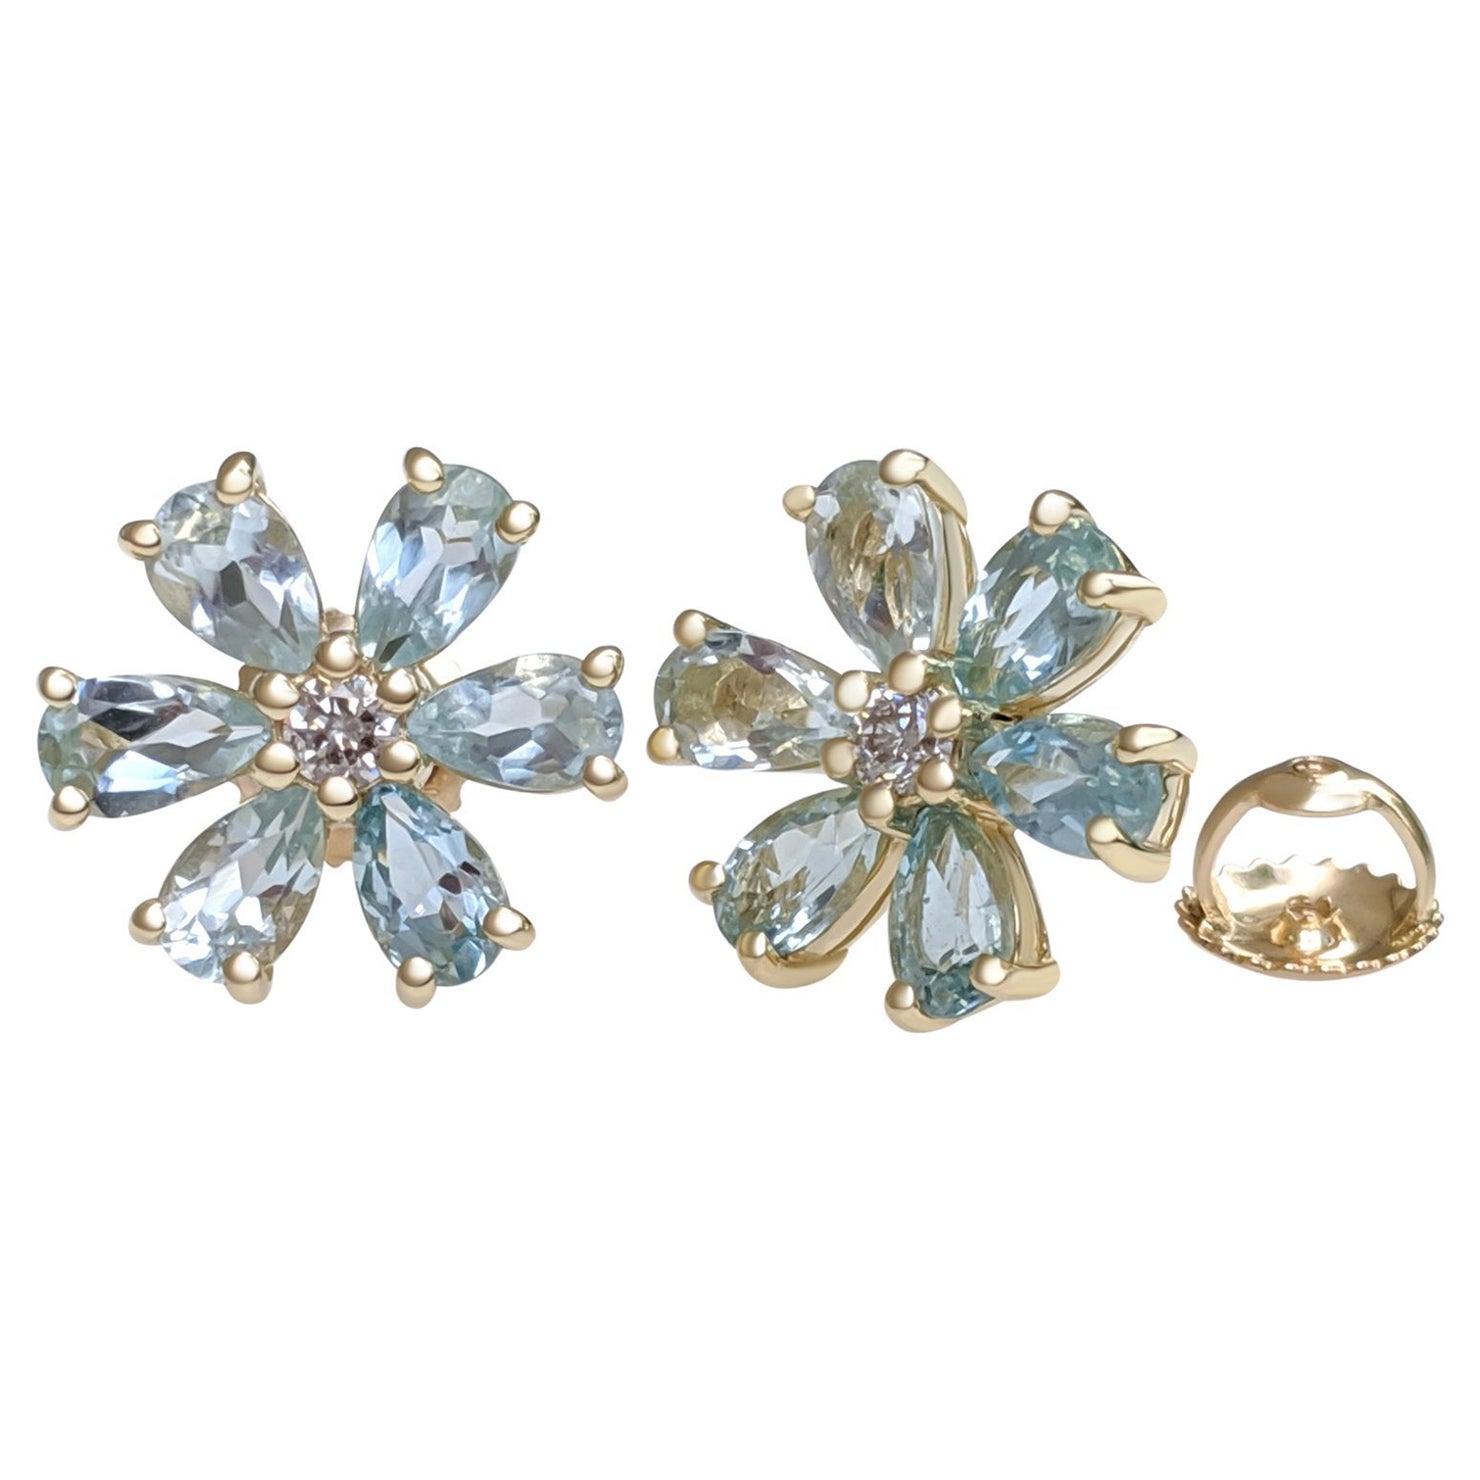 NO RESERVE! 2.17Ct Aquamarine and 0.14 Ct Diamonds 14 kt. Yellow gold - Earrings For Sale